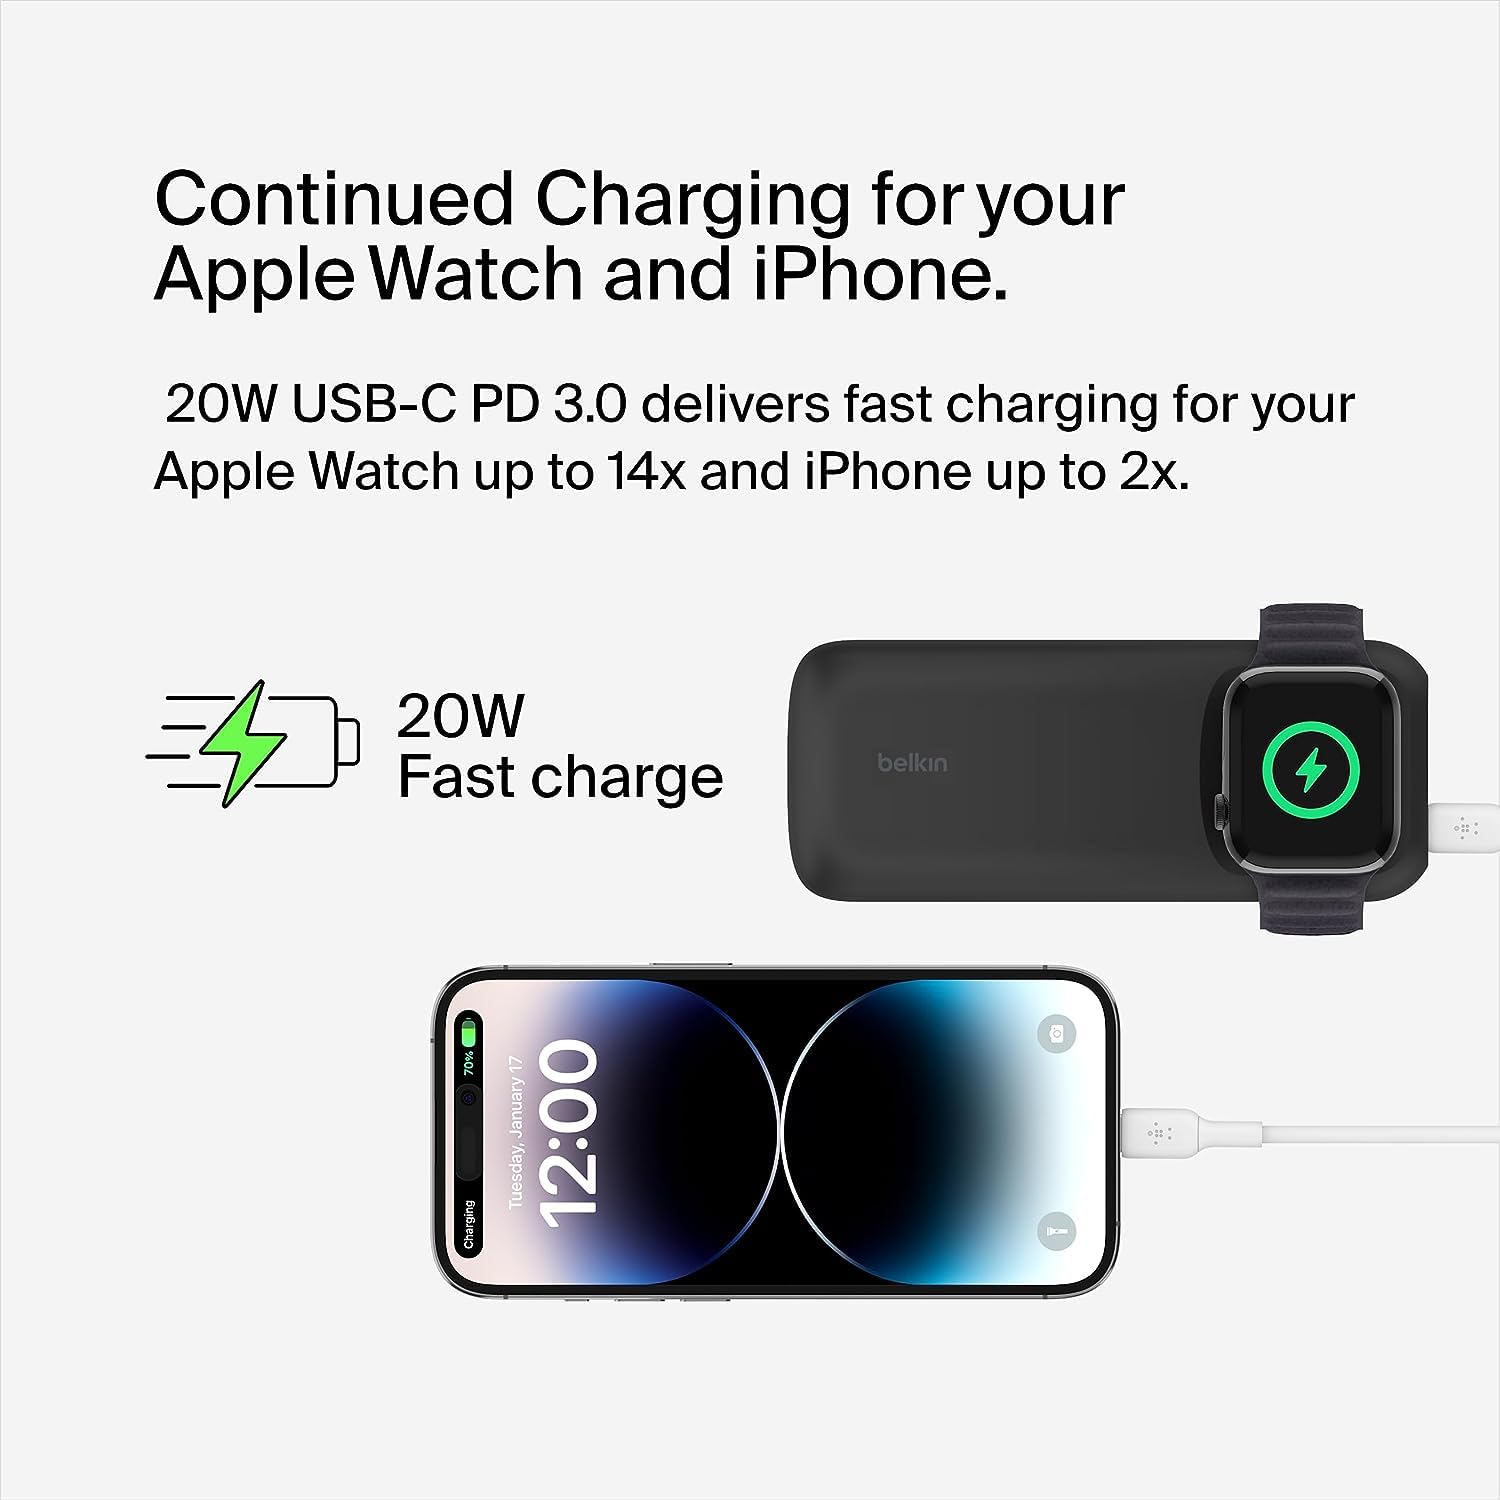 Portable Powerbank 2200mAh with Built-in Apple Watch Charger